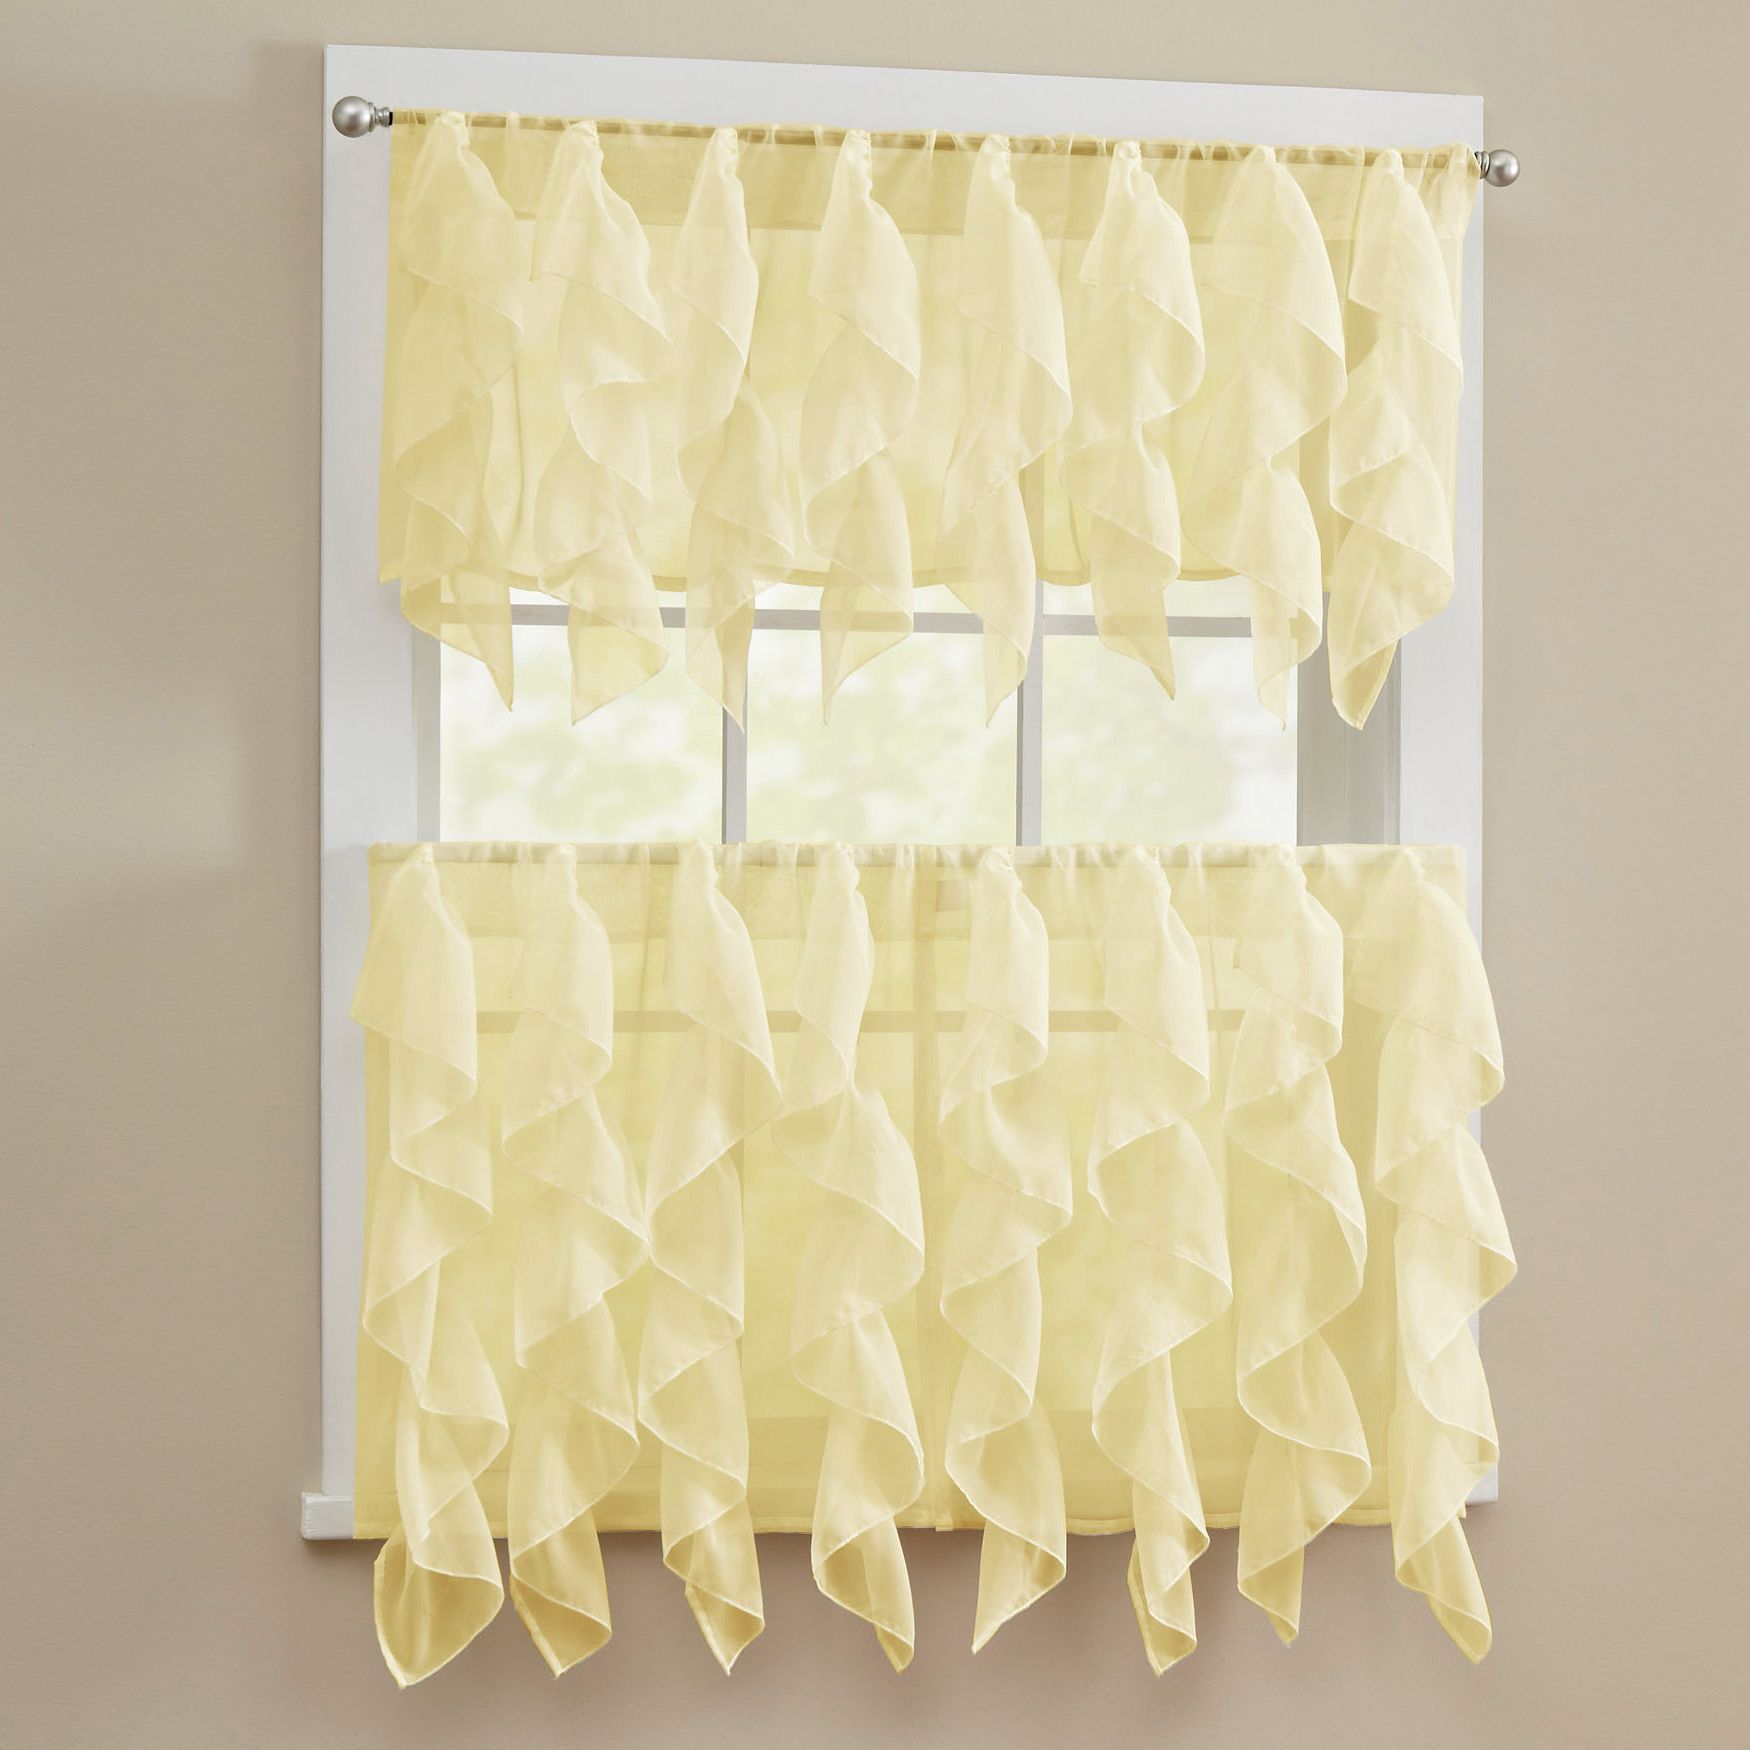 Details About Sheer Voile Vertical Ruffle Window Kitchen Curtain Tiers Or  Valance Maize Throughout Luxurious Kitchen Curtains Tiers, Shade Or Valances (Photo 15 of 20)